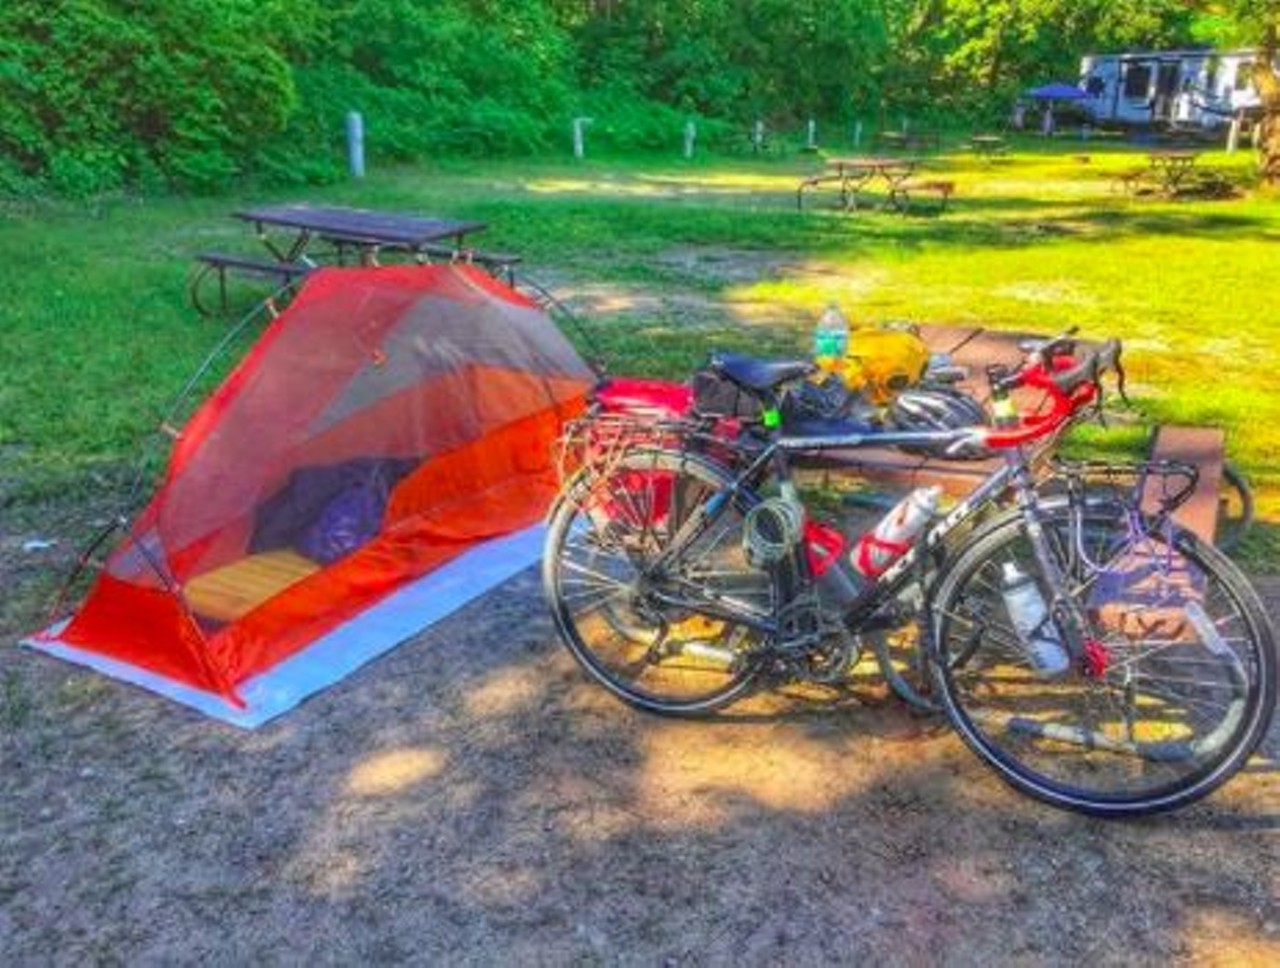 Weko Beach Campground
Bridgman, MI
Located along the shores of lake Michigan, this campsite has a lot to offer! The developed and undeveloped campgrounds both include access to clean bathrooms, outdoor grills, hot showers, concession stands and playgrounds.
Photo via Instagram user @nightmaretherustyrobot